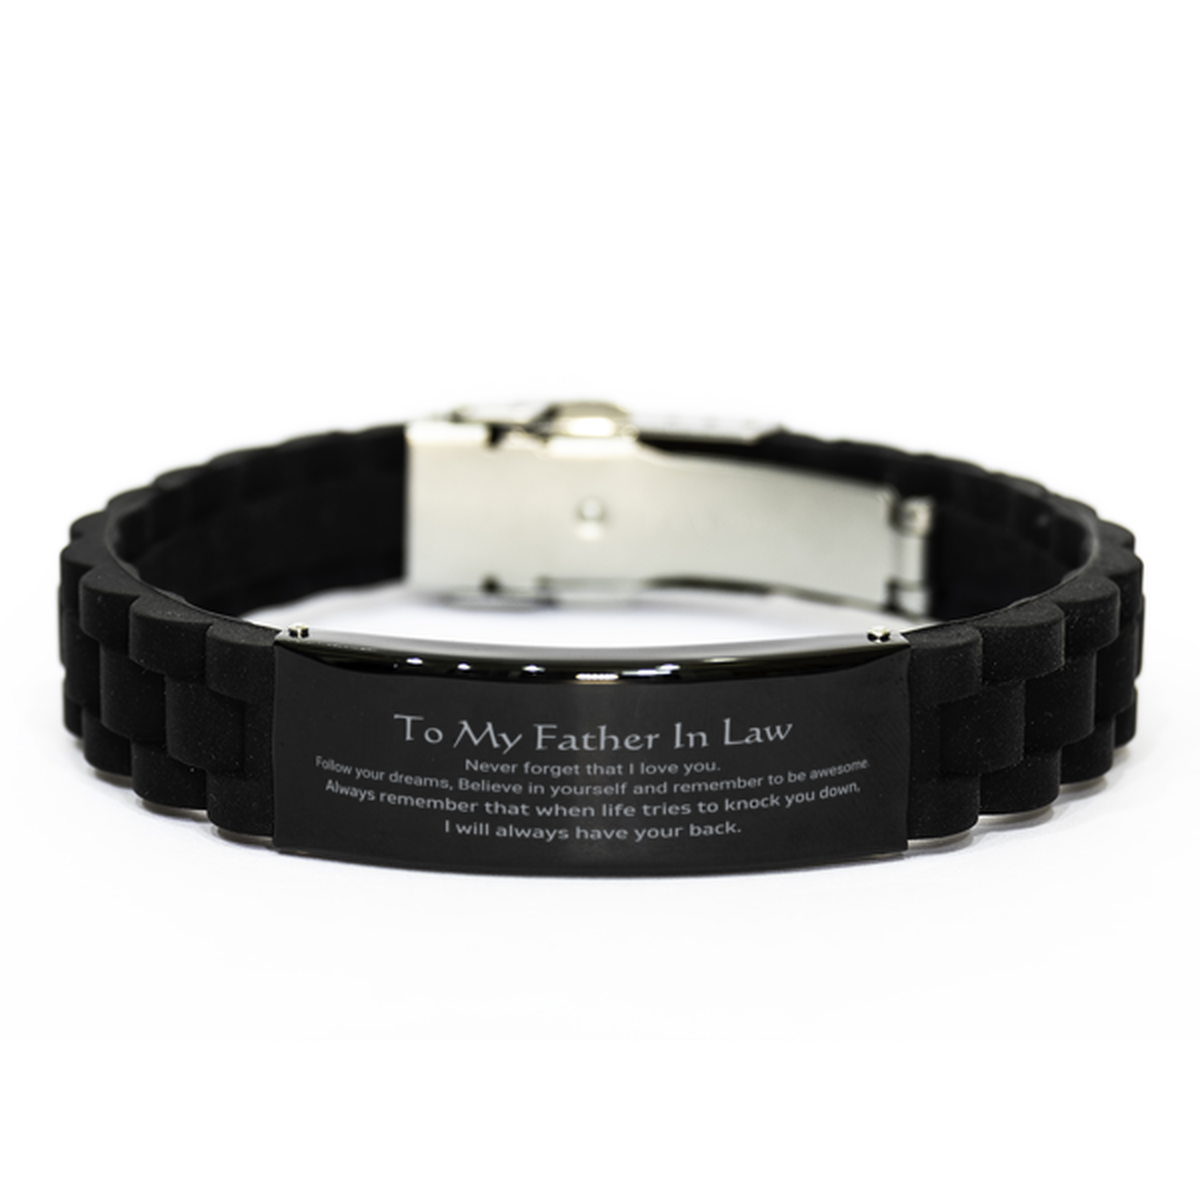 Inspirational Gifts for Father In Law, Follow your dreams, Believe in yourself, Father In Law Black Glidelock Clasp Bracelet, Birthday Christmas Unique Gifts For Father In Law